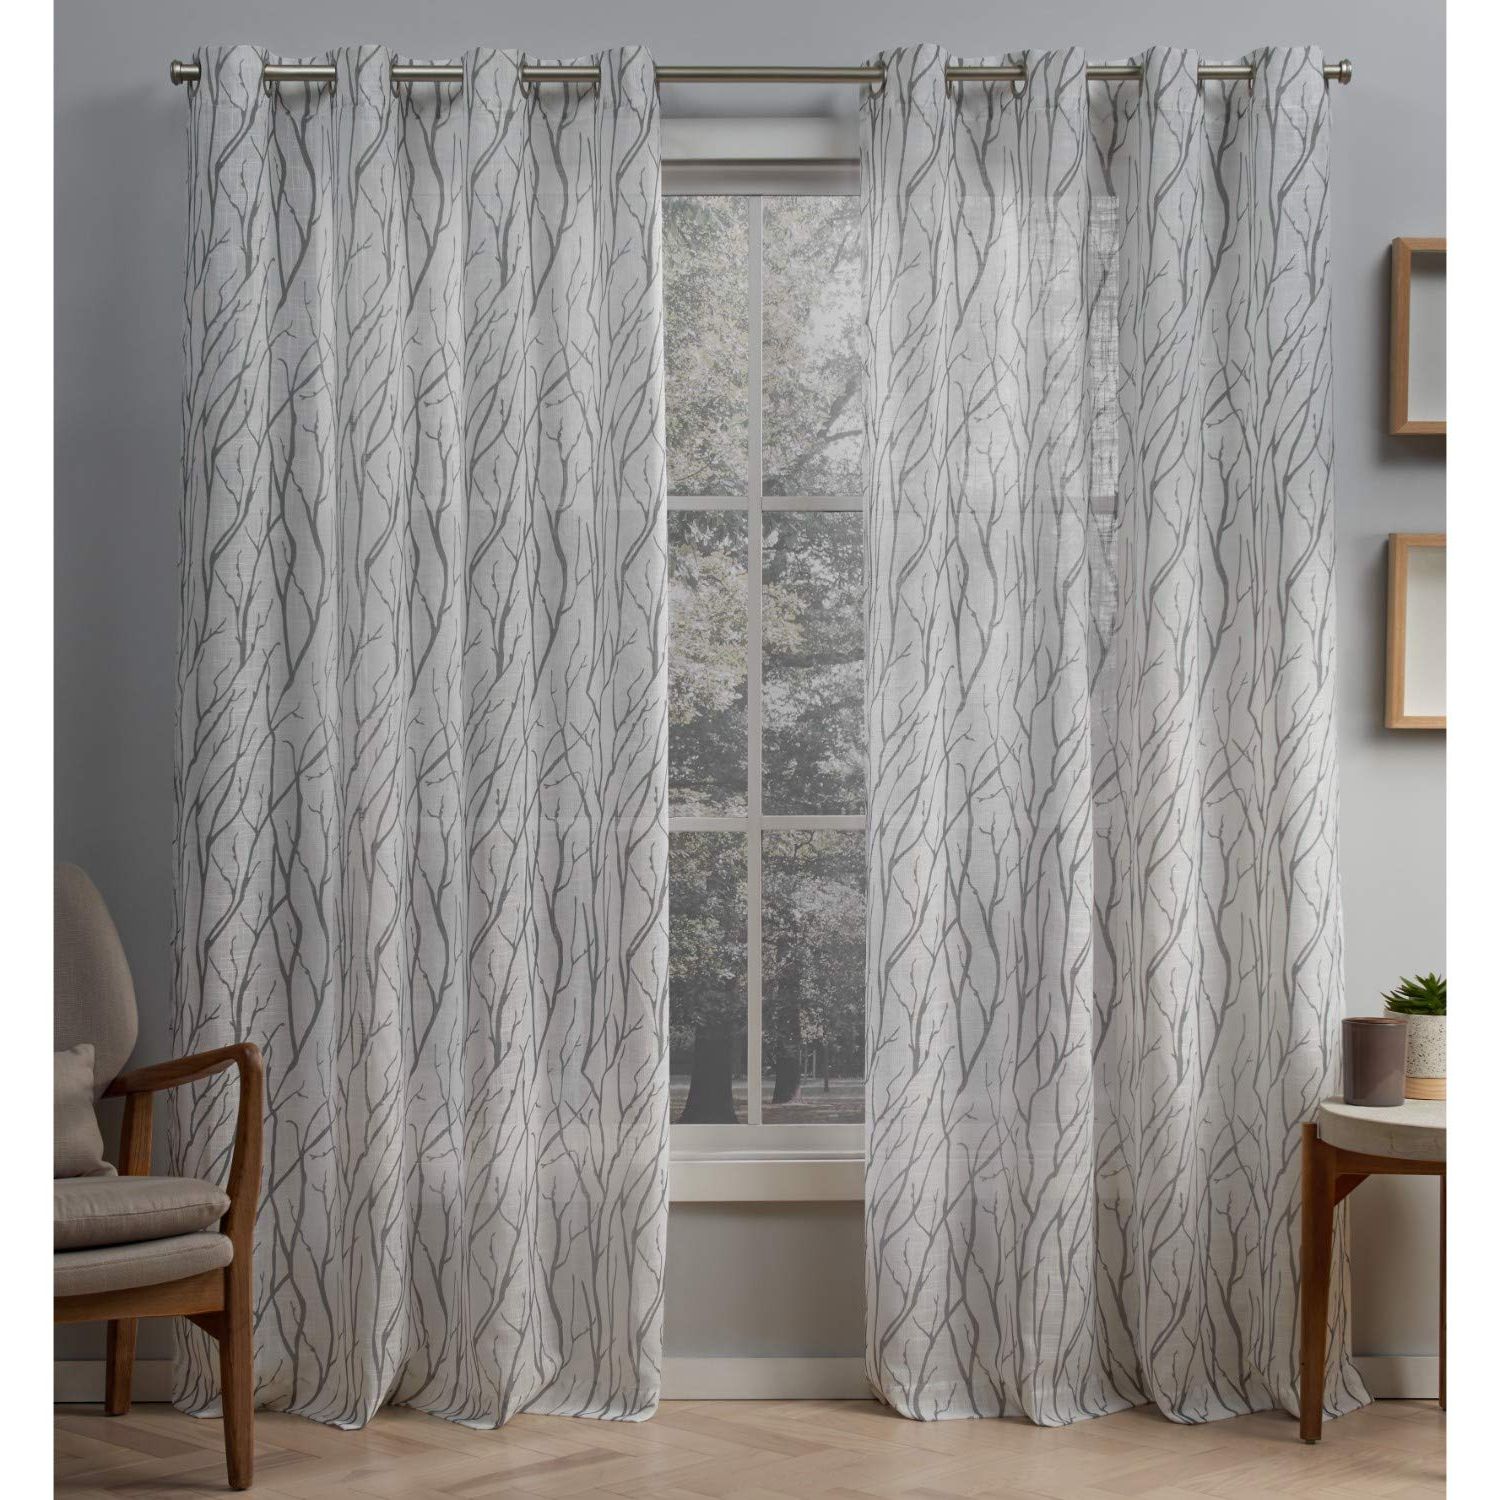 Favorite Exclusive Home Curtains Oakdale Motif Textured Linen Window Curtain Panel  Pair With Grommet Top, 54x84, Dove Grey, 2 Piece For Oakdale Textured Linen Sheer Grommet Top Curtain Panel Pairs (View 3 of 20)